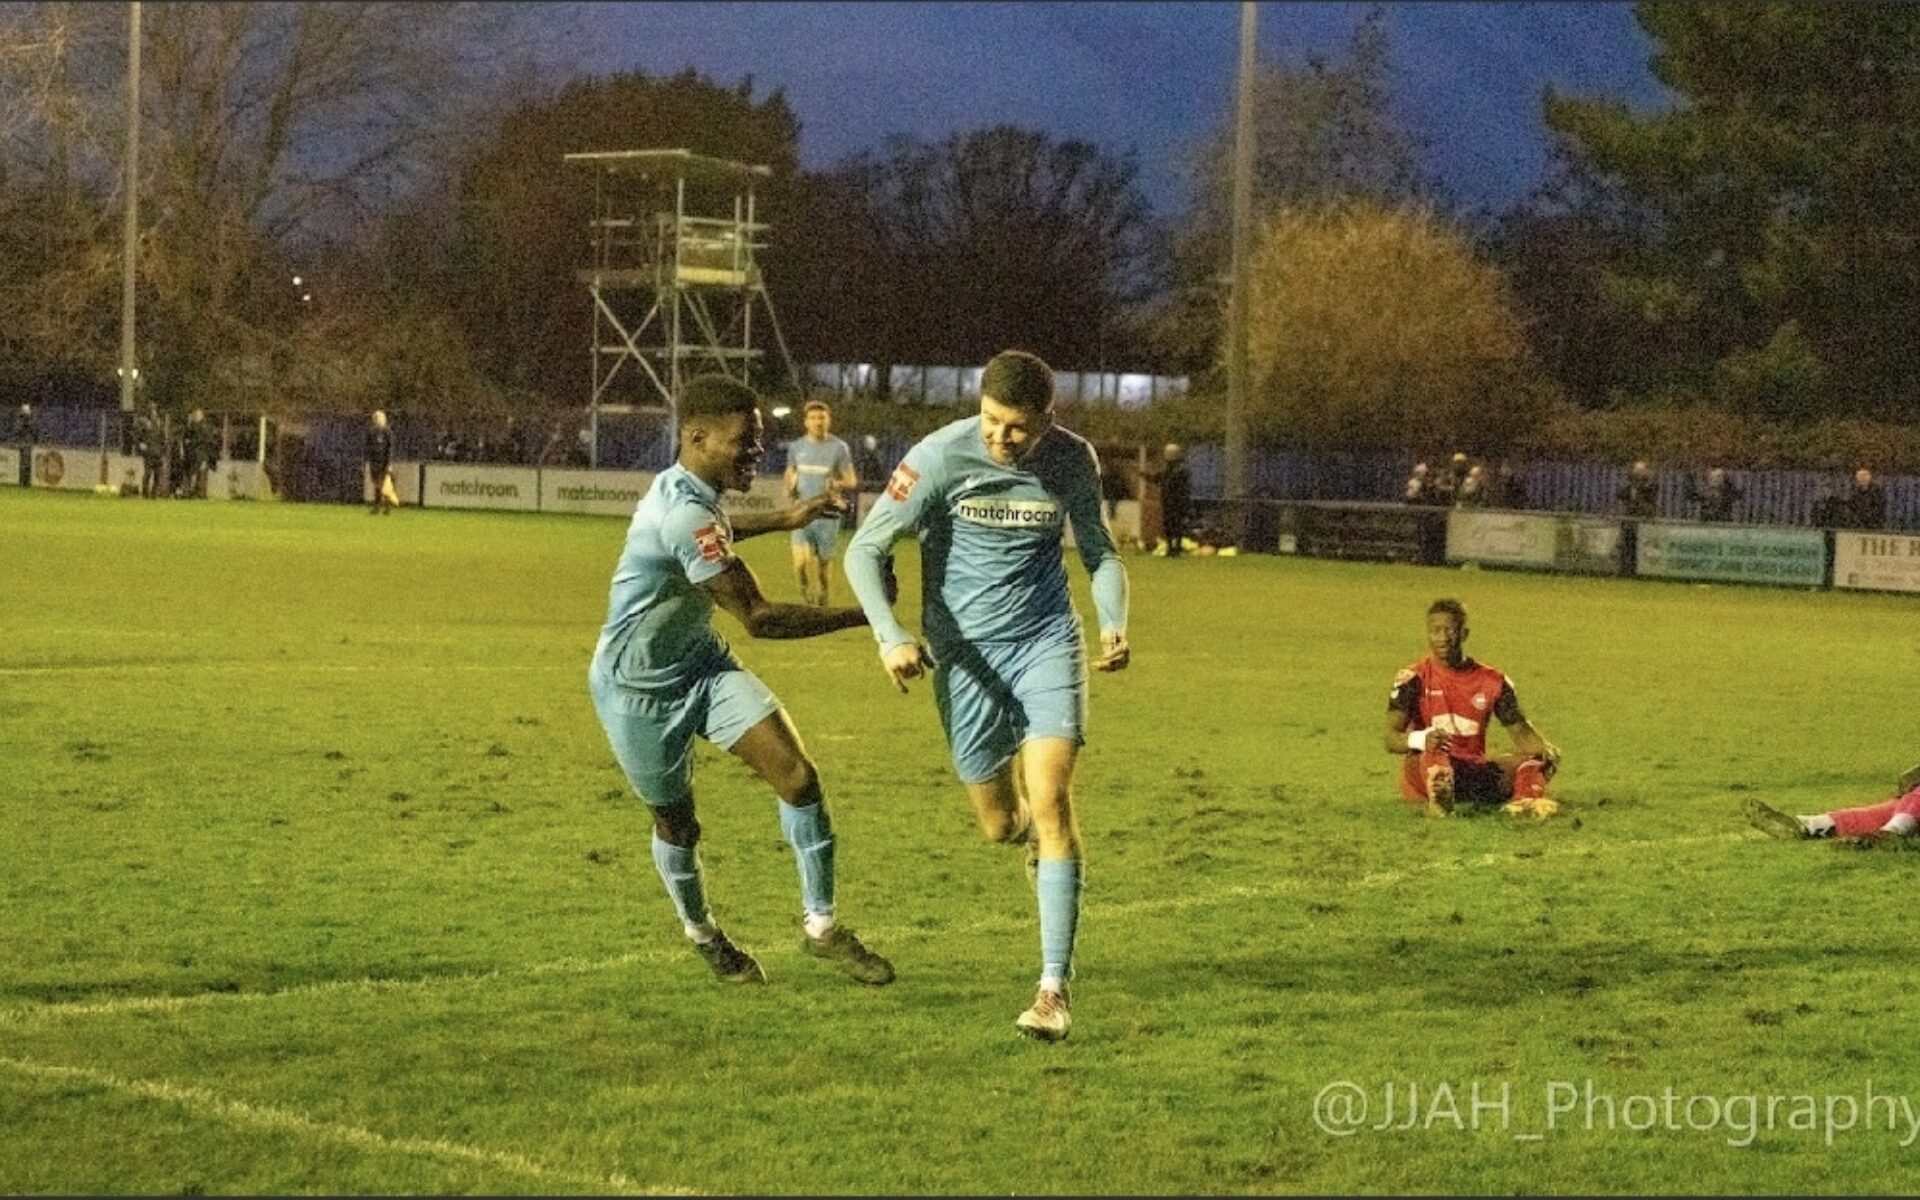 MATCH REPORT - WALTHAMSTOW Featured Image